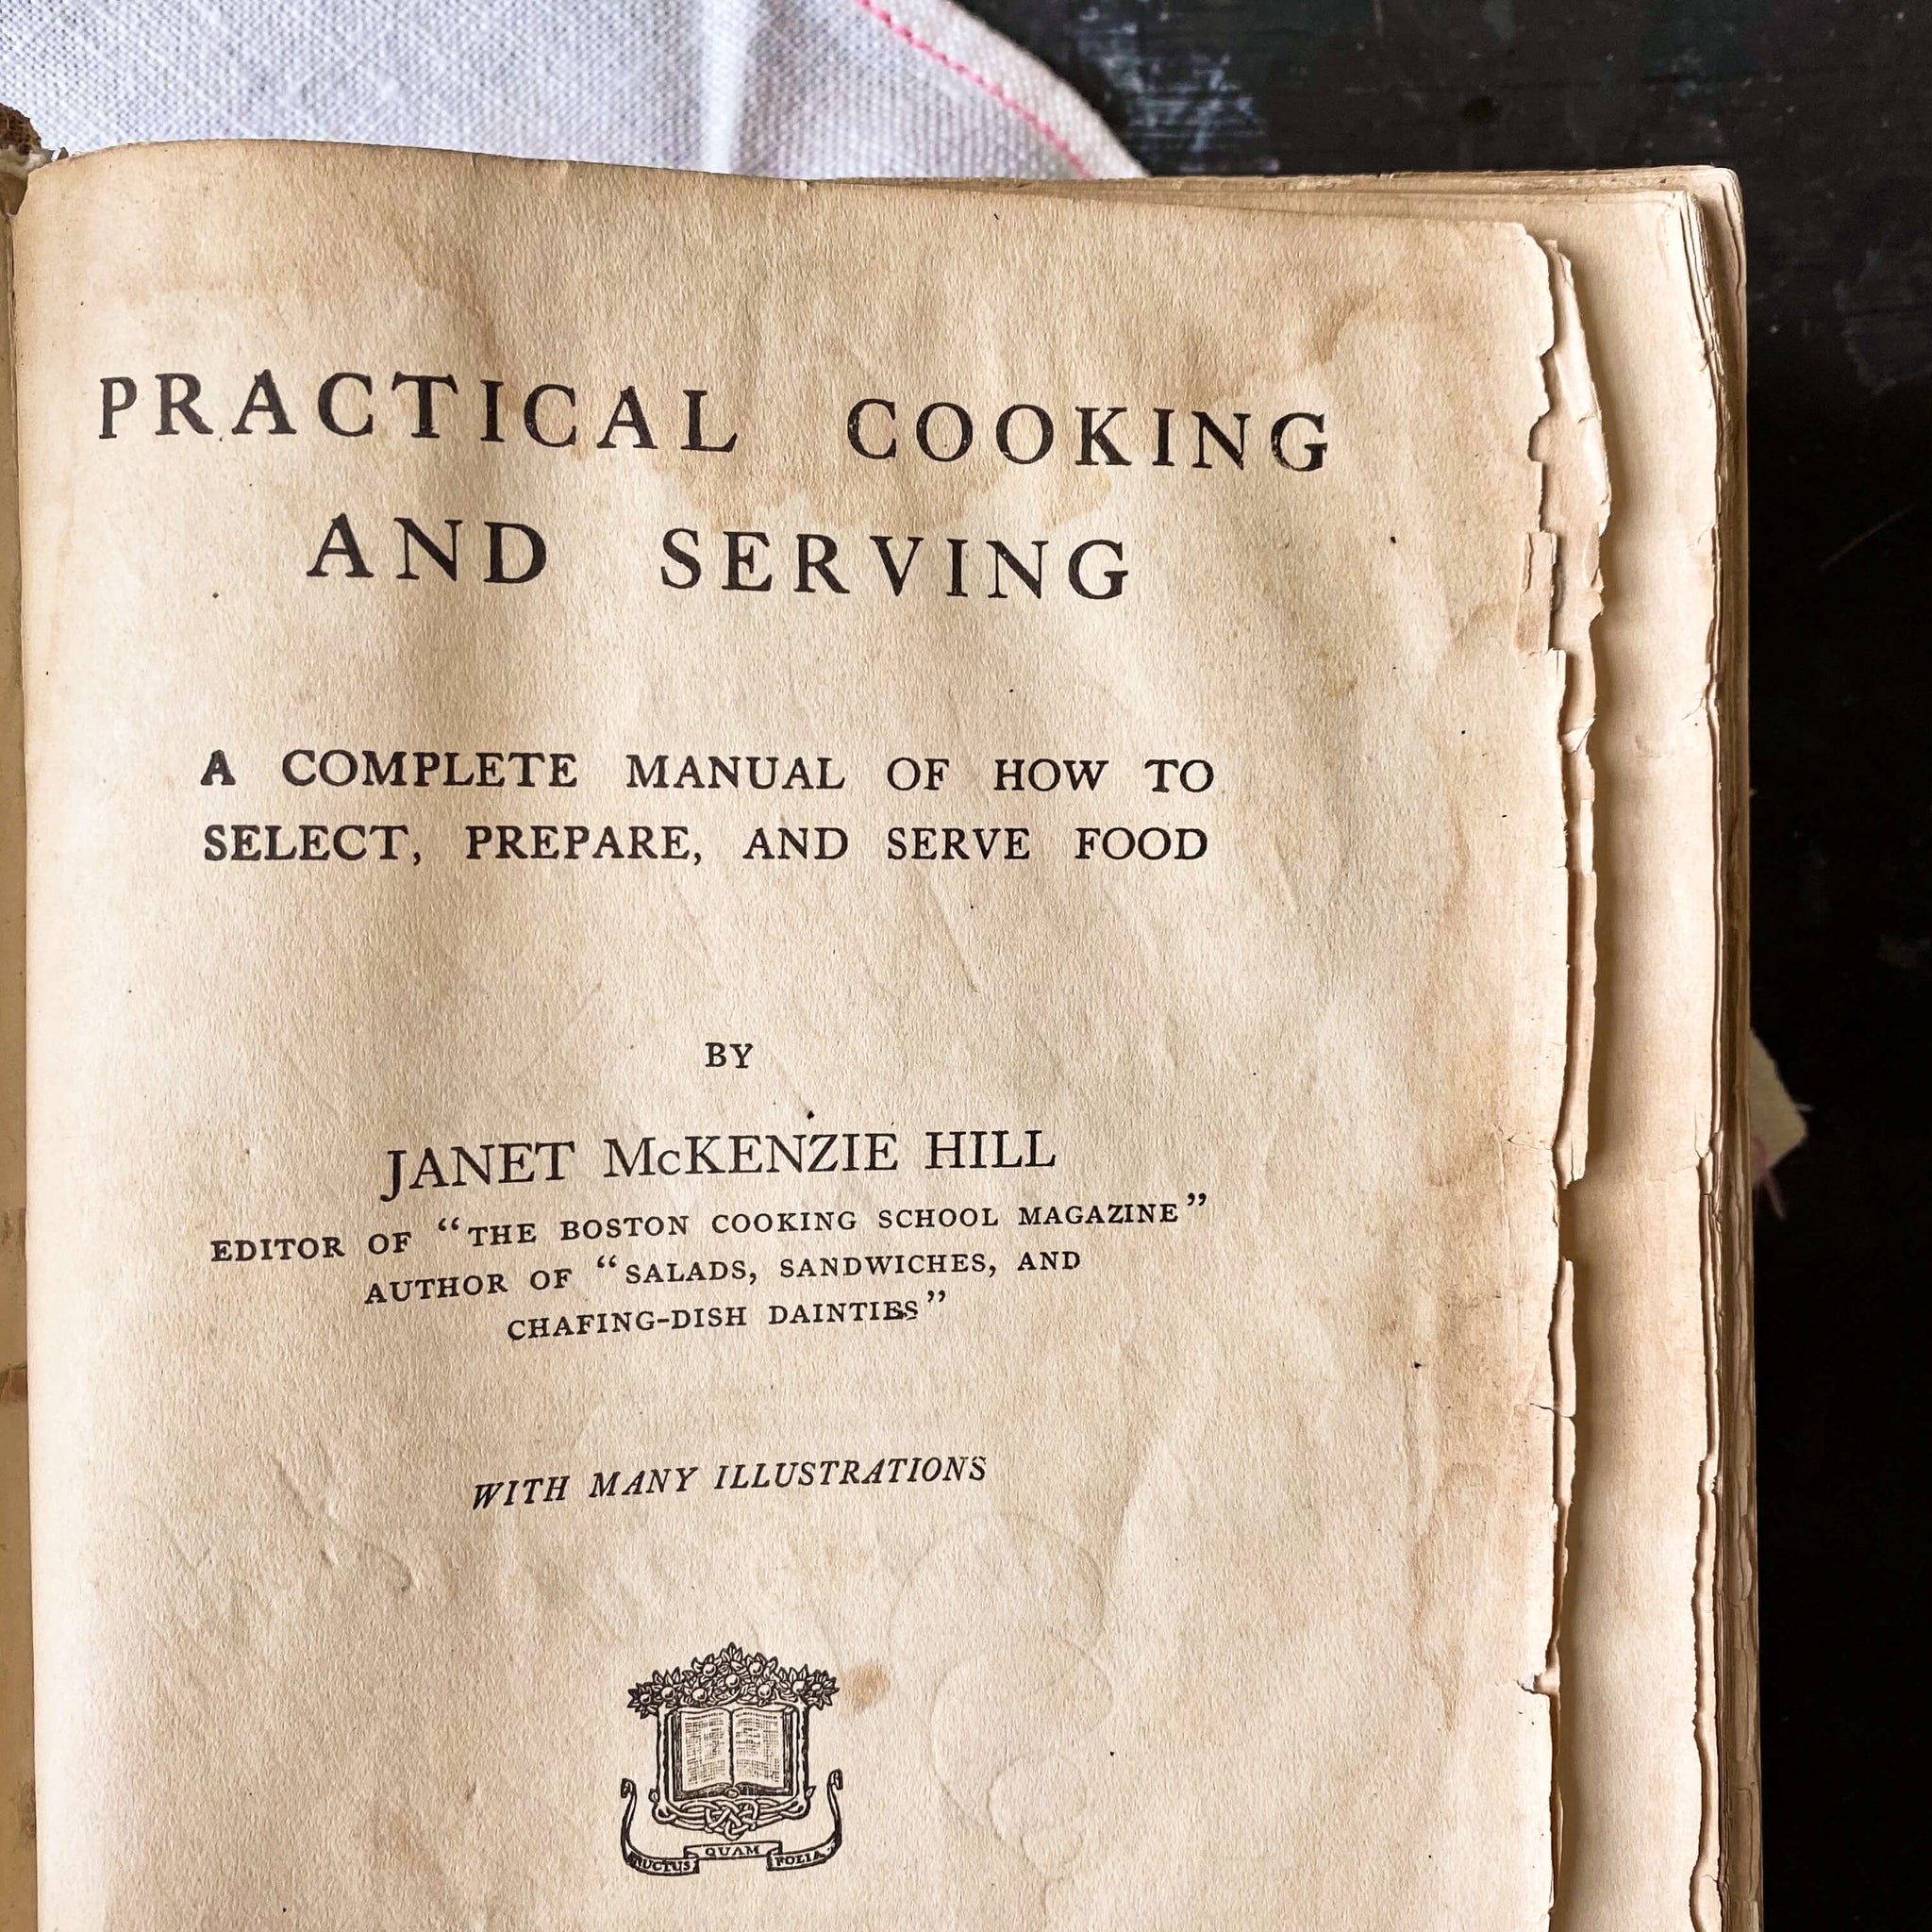 Rare Antique 1920s Cookbook - Practical Cooking & Serving - Janet McKenzie Hill - 1923 Edition